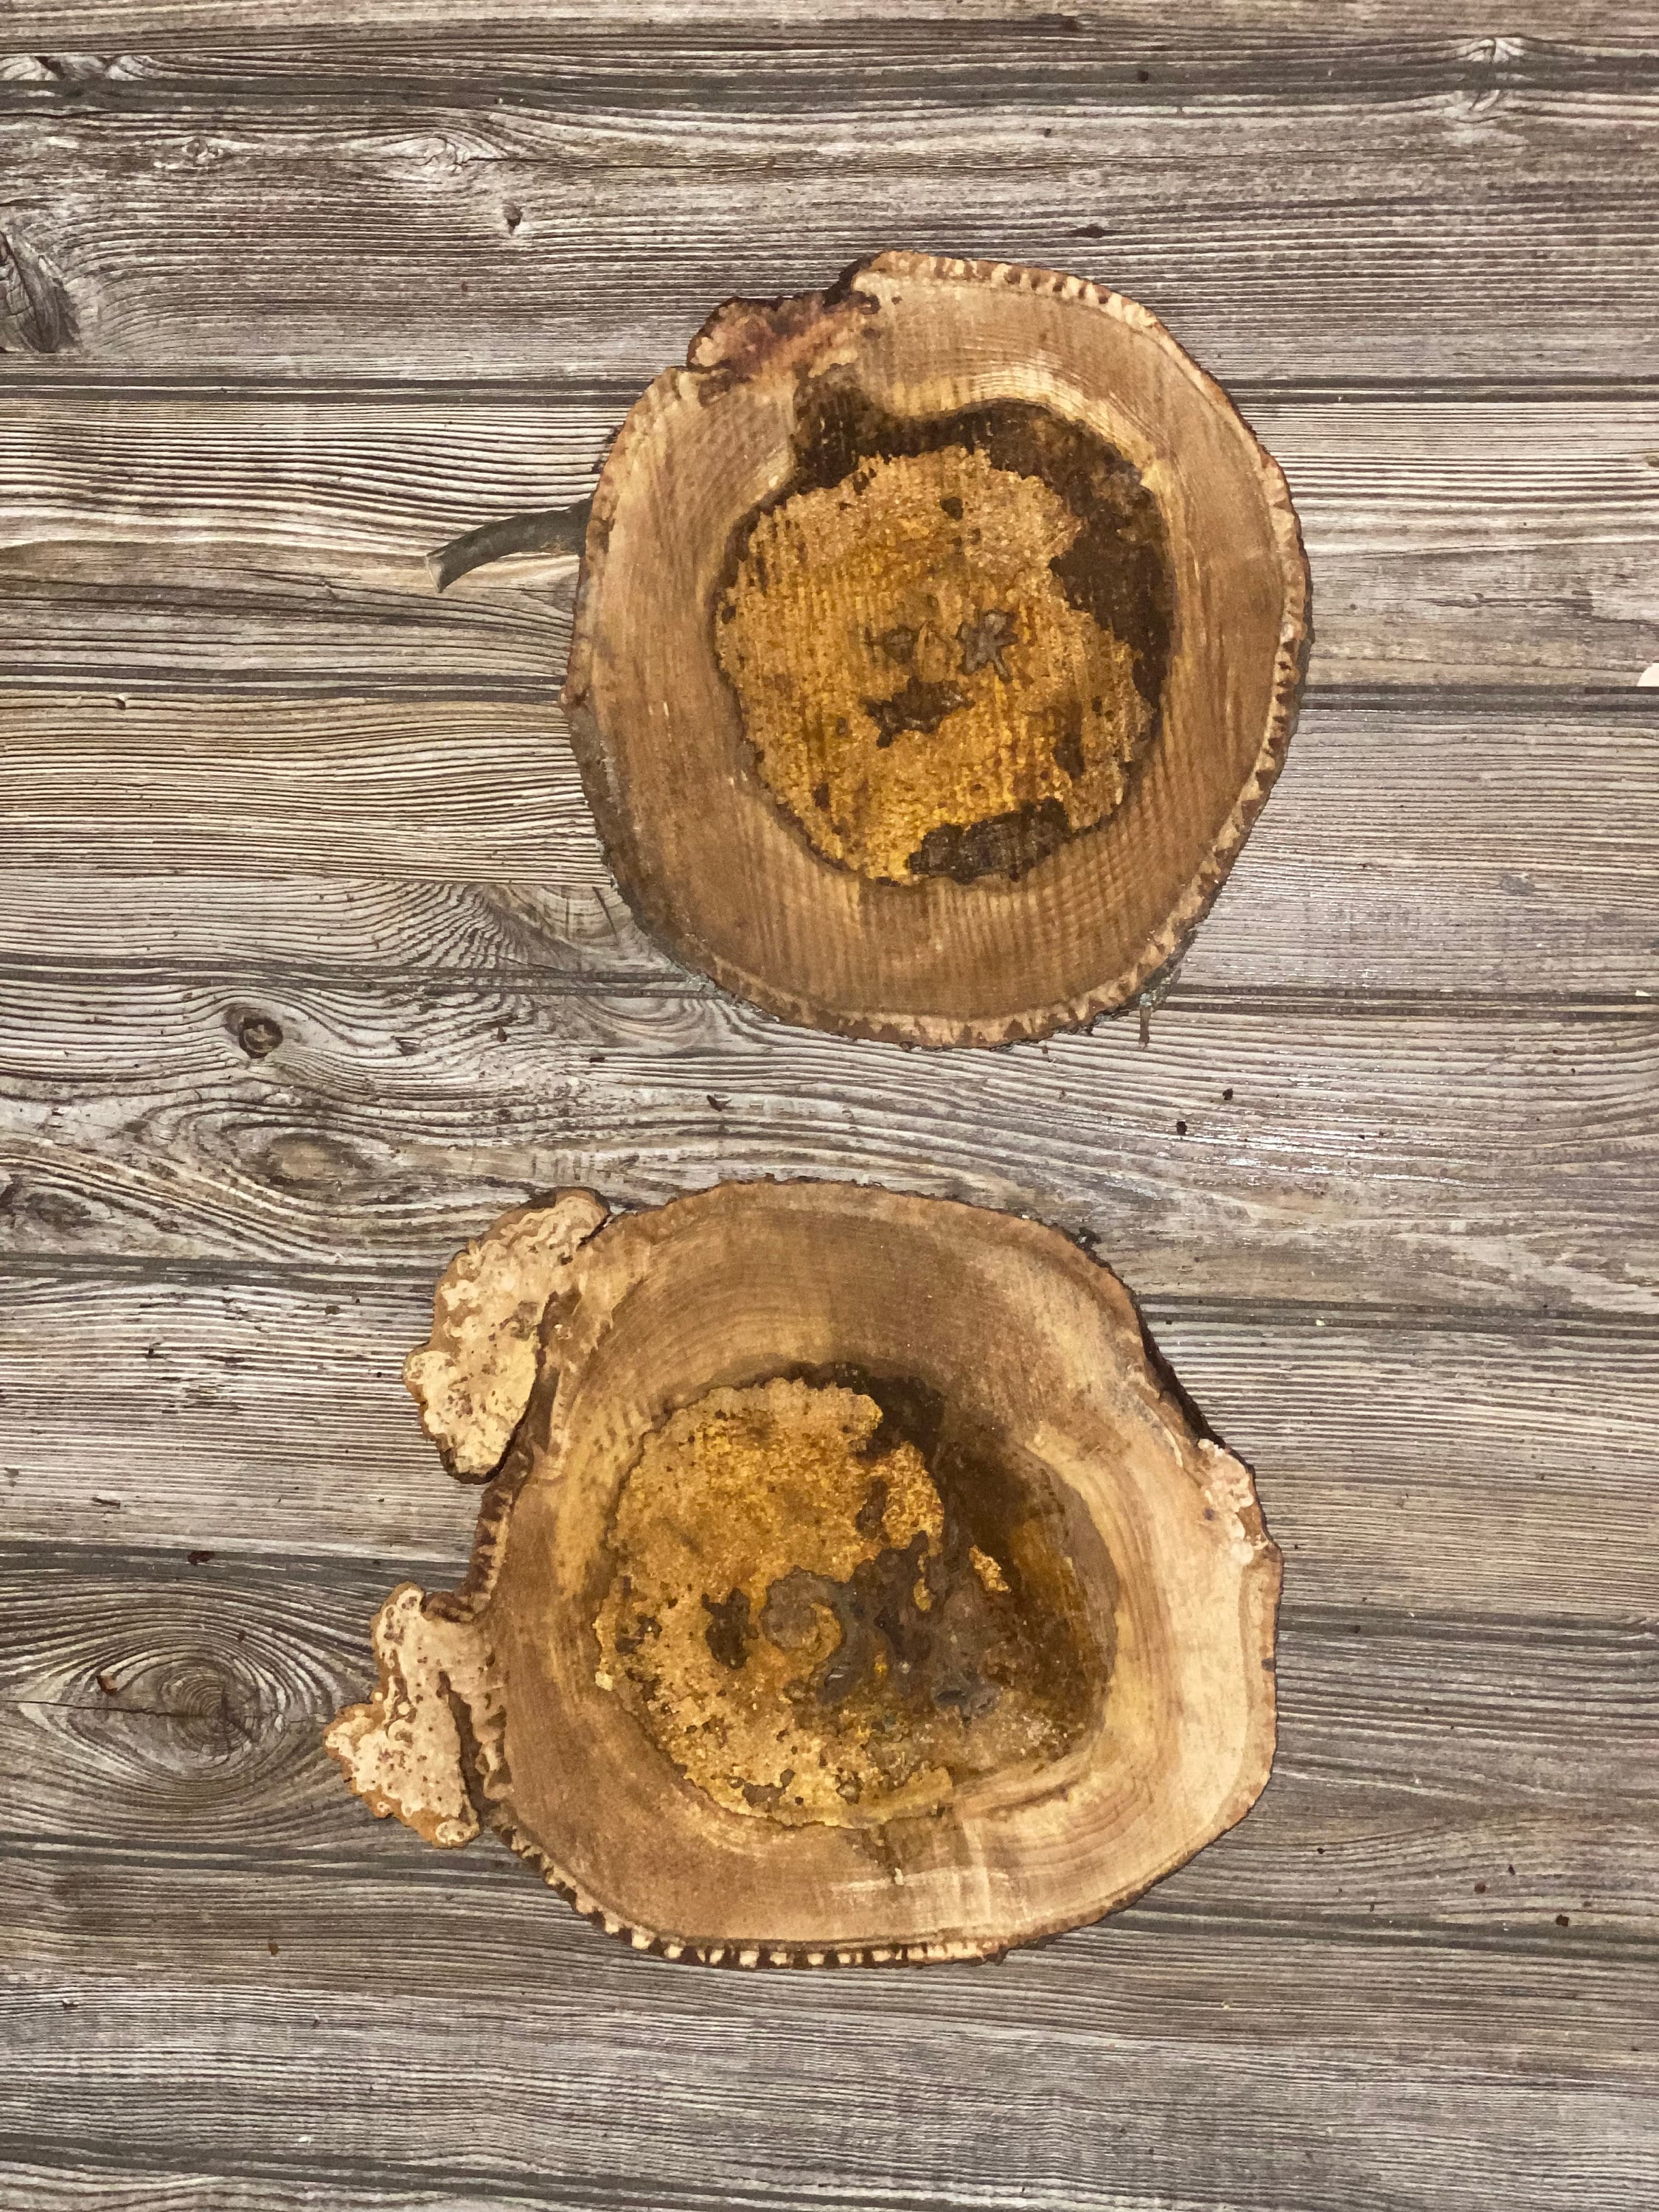 Two Hickory Burl Slices, Approximately 10.5-12.5 Inches Long by 10 Inches Wide and 3/4 Inch Thick